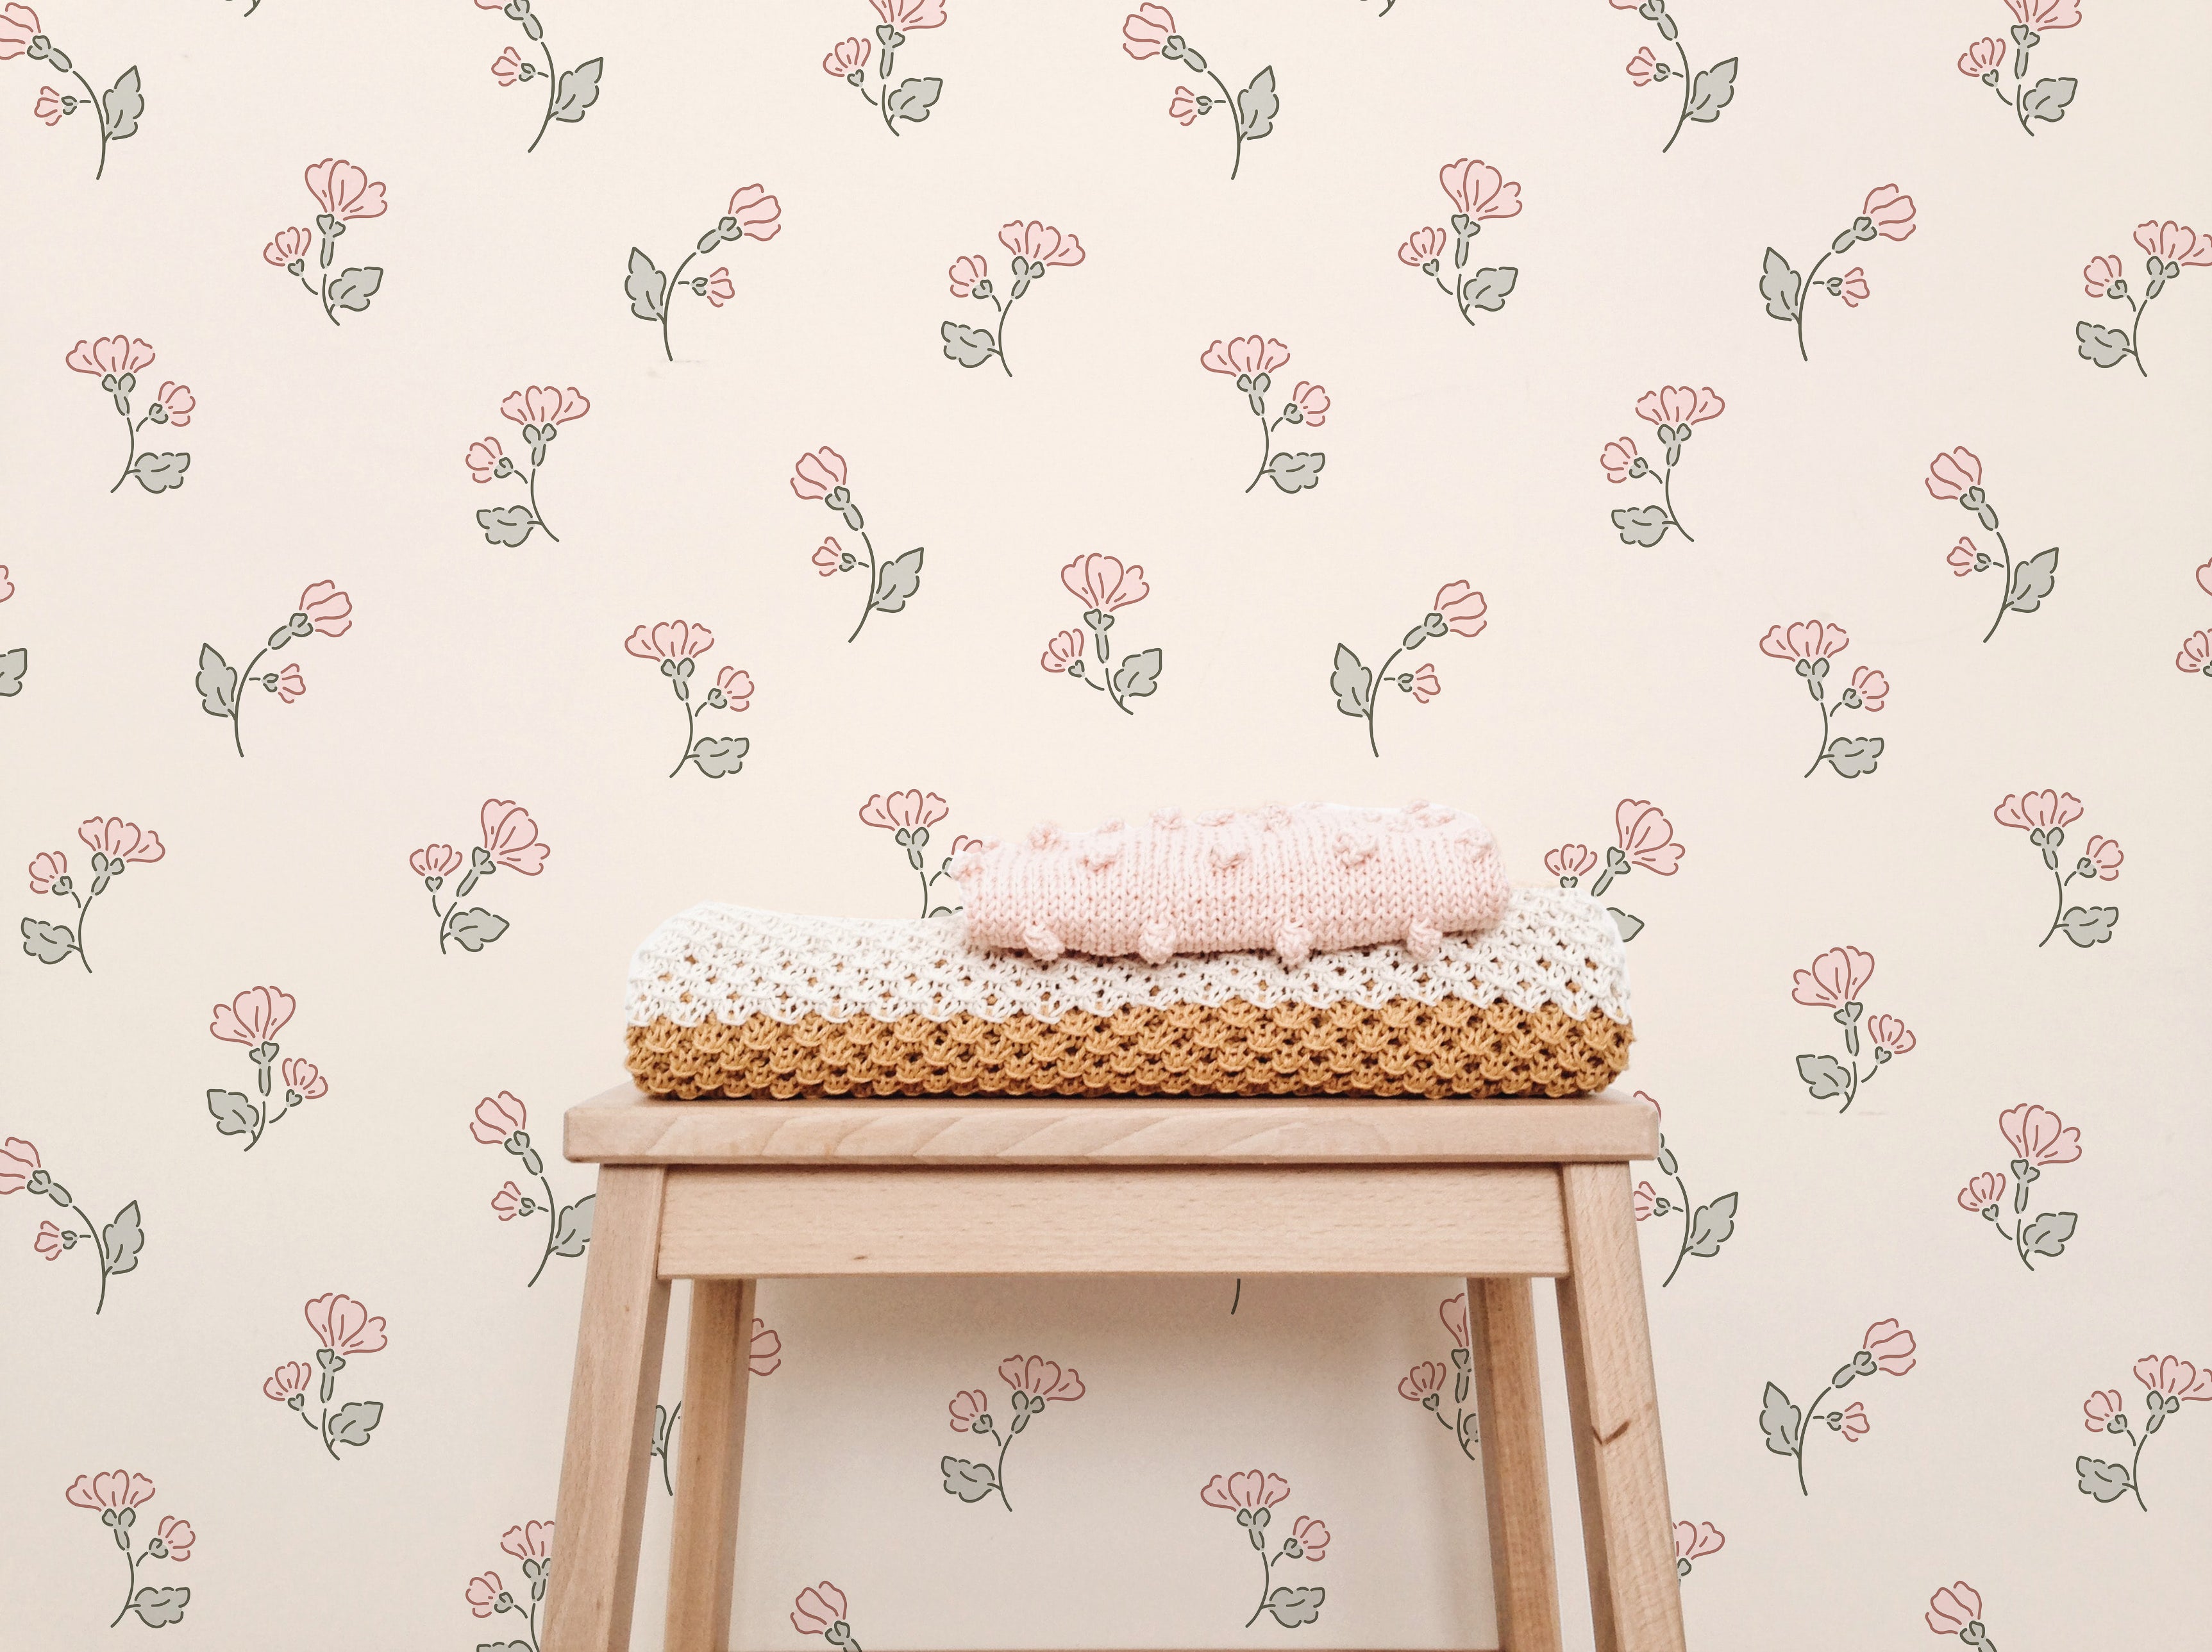 A cozy nursery setting enhanced by the Chara Wallpaper, which showcases delicate pink flowers and green leaves on a cream backdrop. A wooden stool displays a stack of hand-knitted blankets in shades of pink, white, and brown, adding a touch of homely warmth against the floral wallpaper.